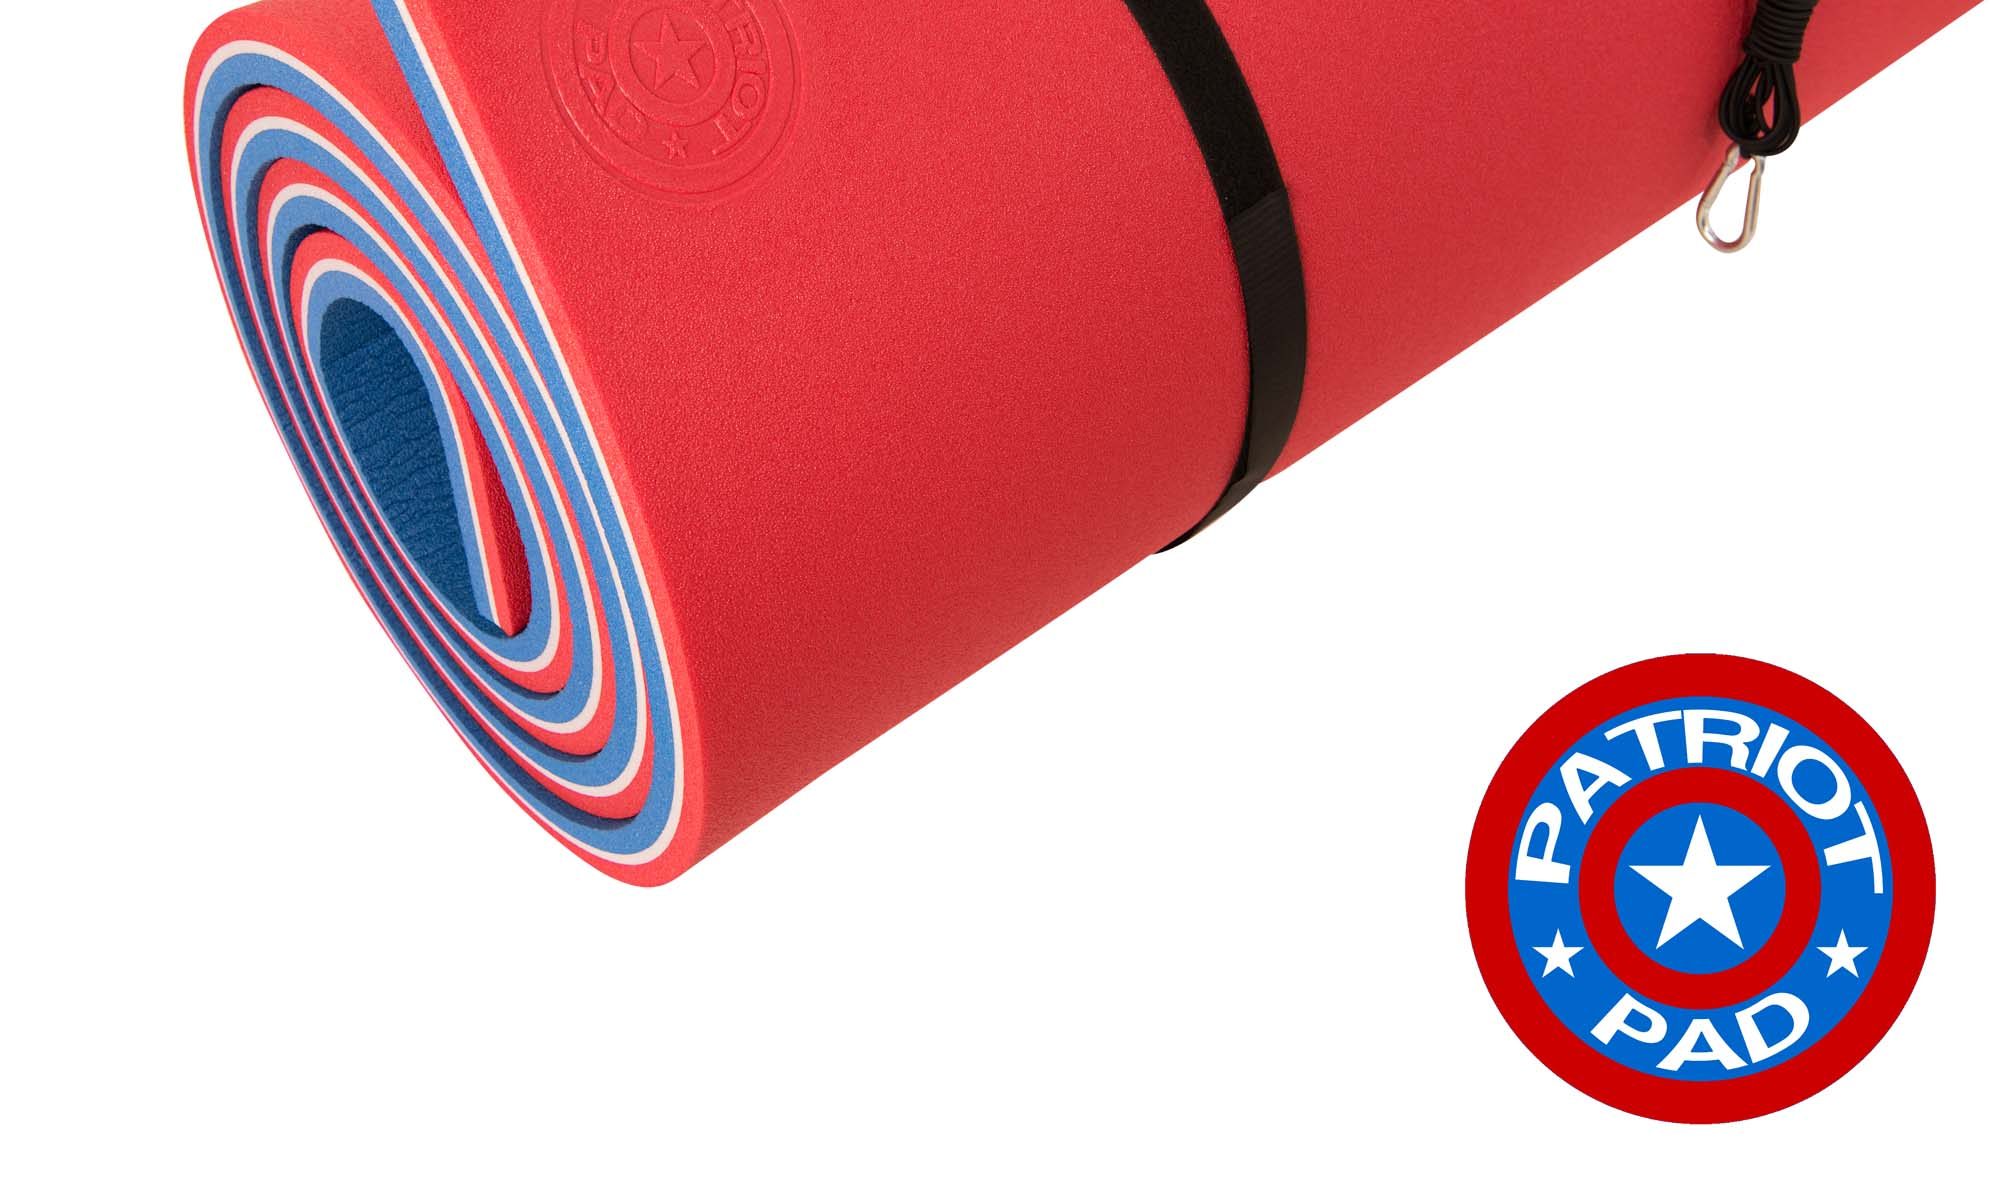 red white & blue floating pad